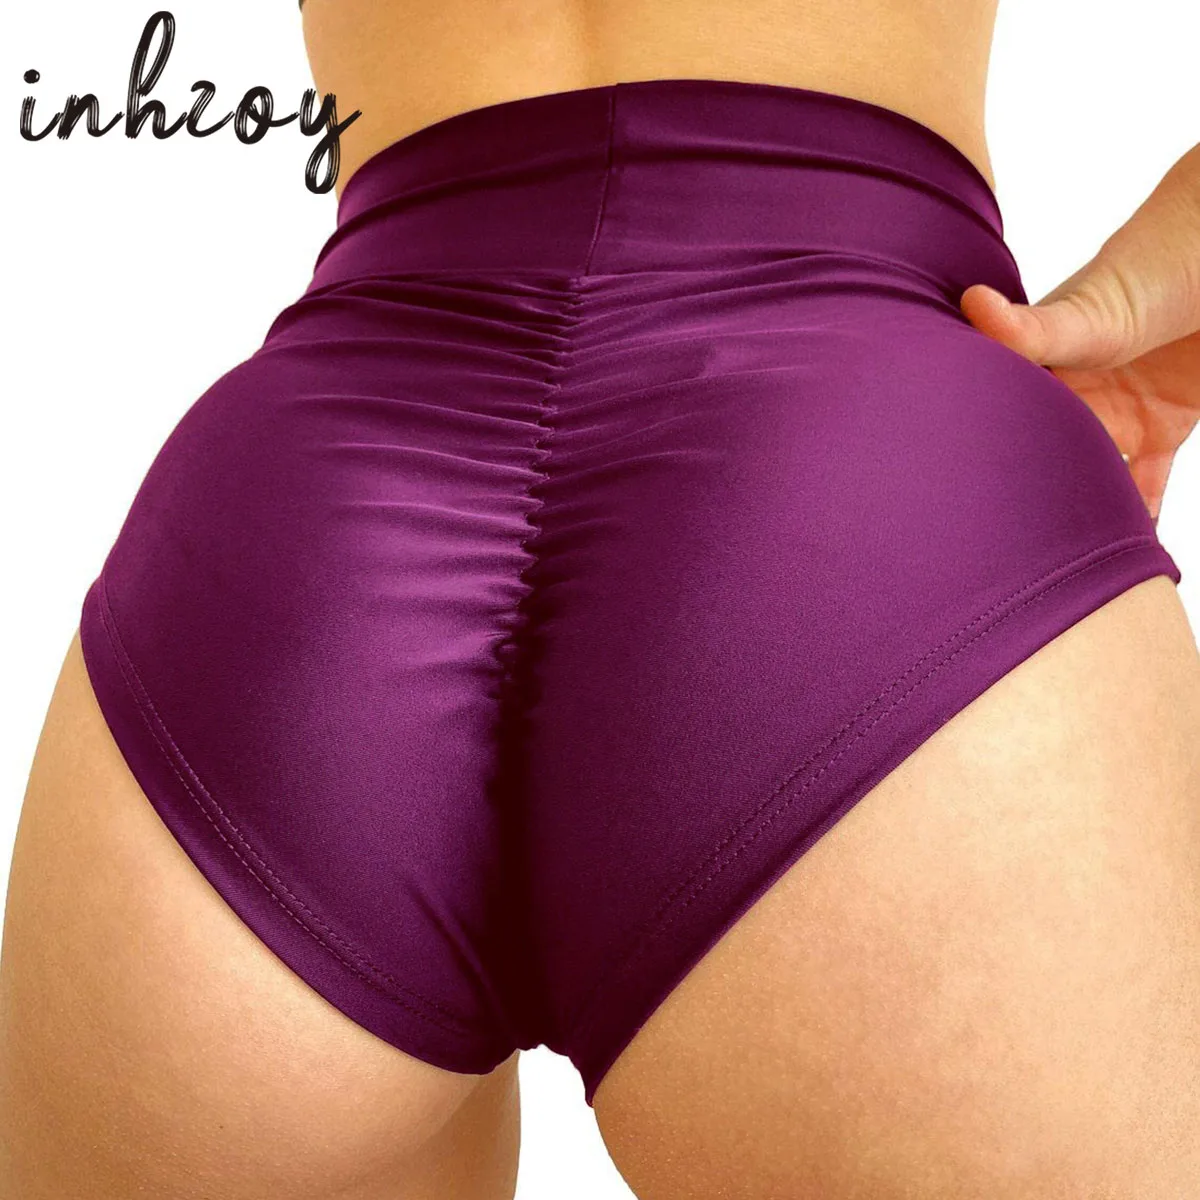 

Women Sexy High Waist Workout Fitness Shorts Ruched Back Cheer Booty Dance Shorts Hips Push Up Hot Pants Pole Dancing Clubwear